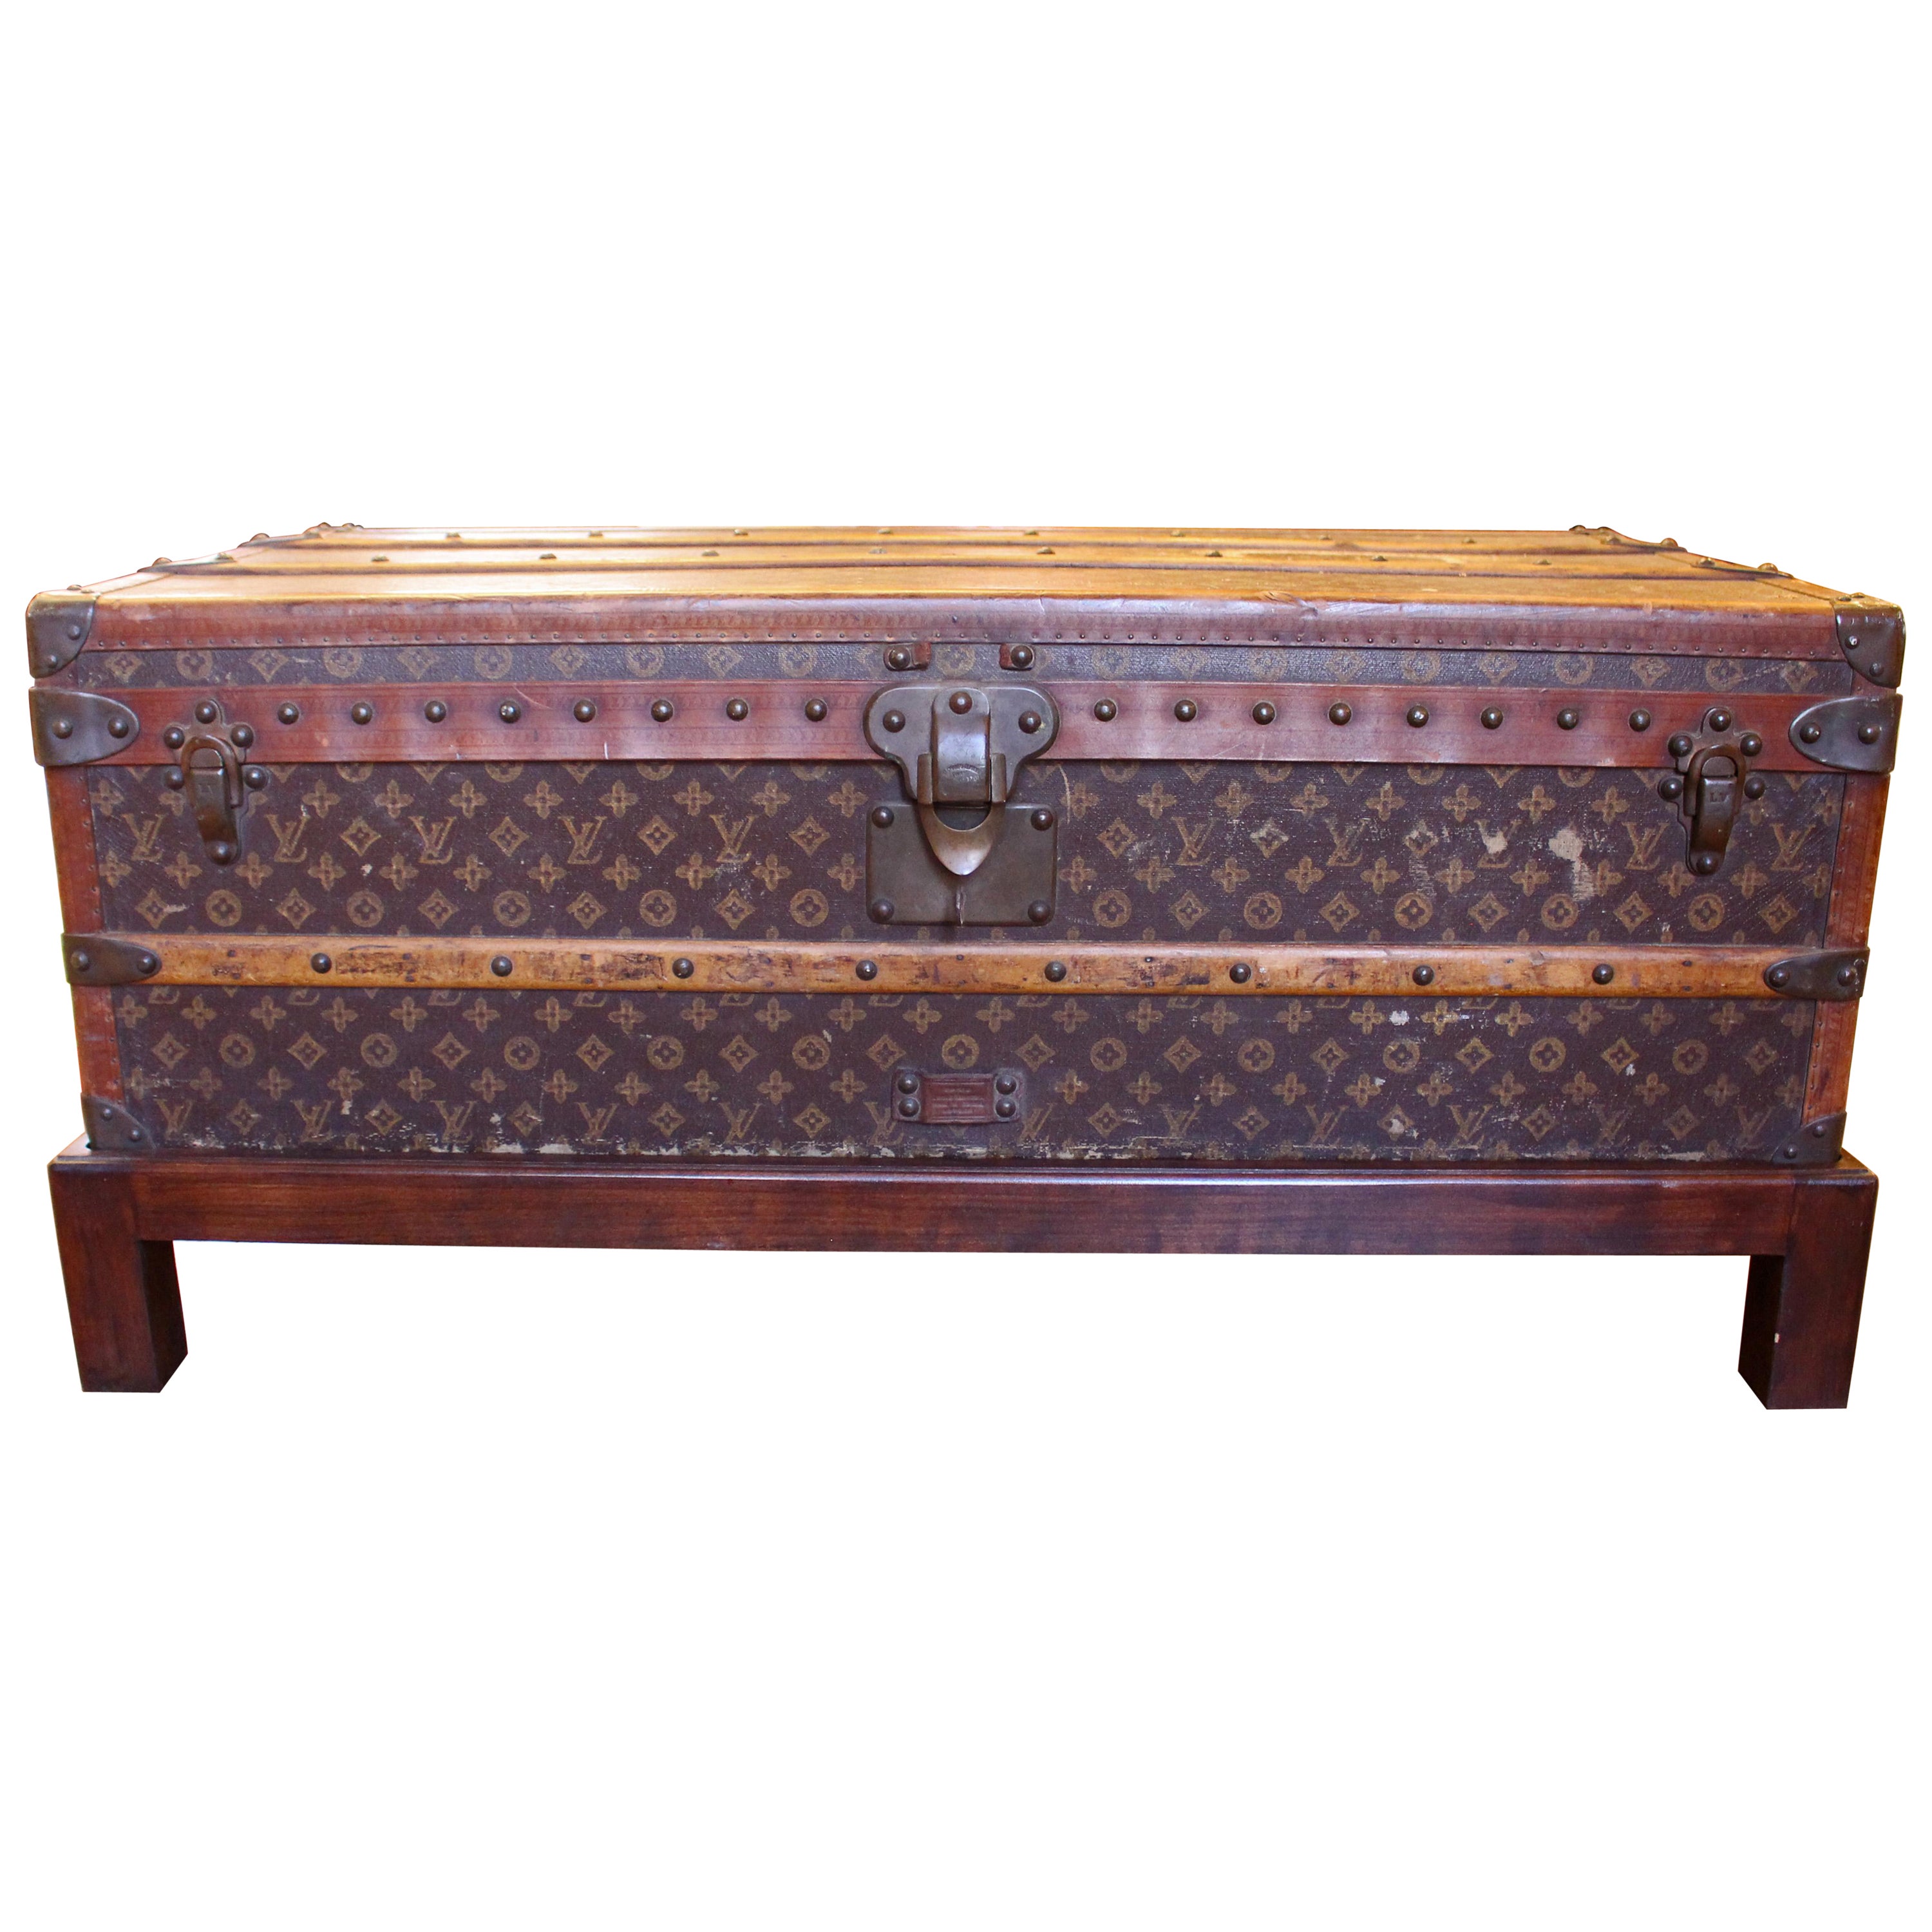 Early 20th Century Louis Vuitton Travel Trunk